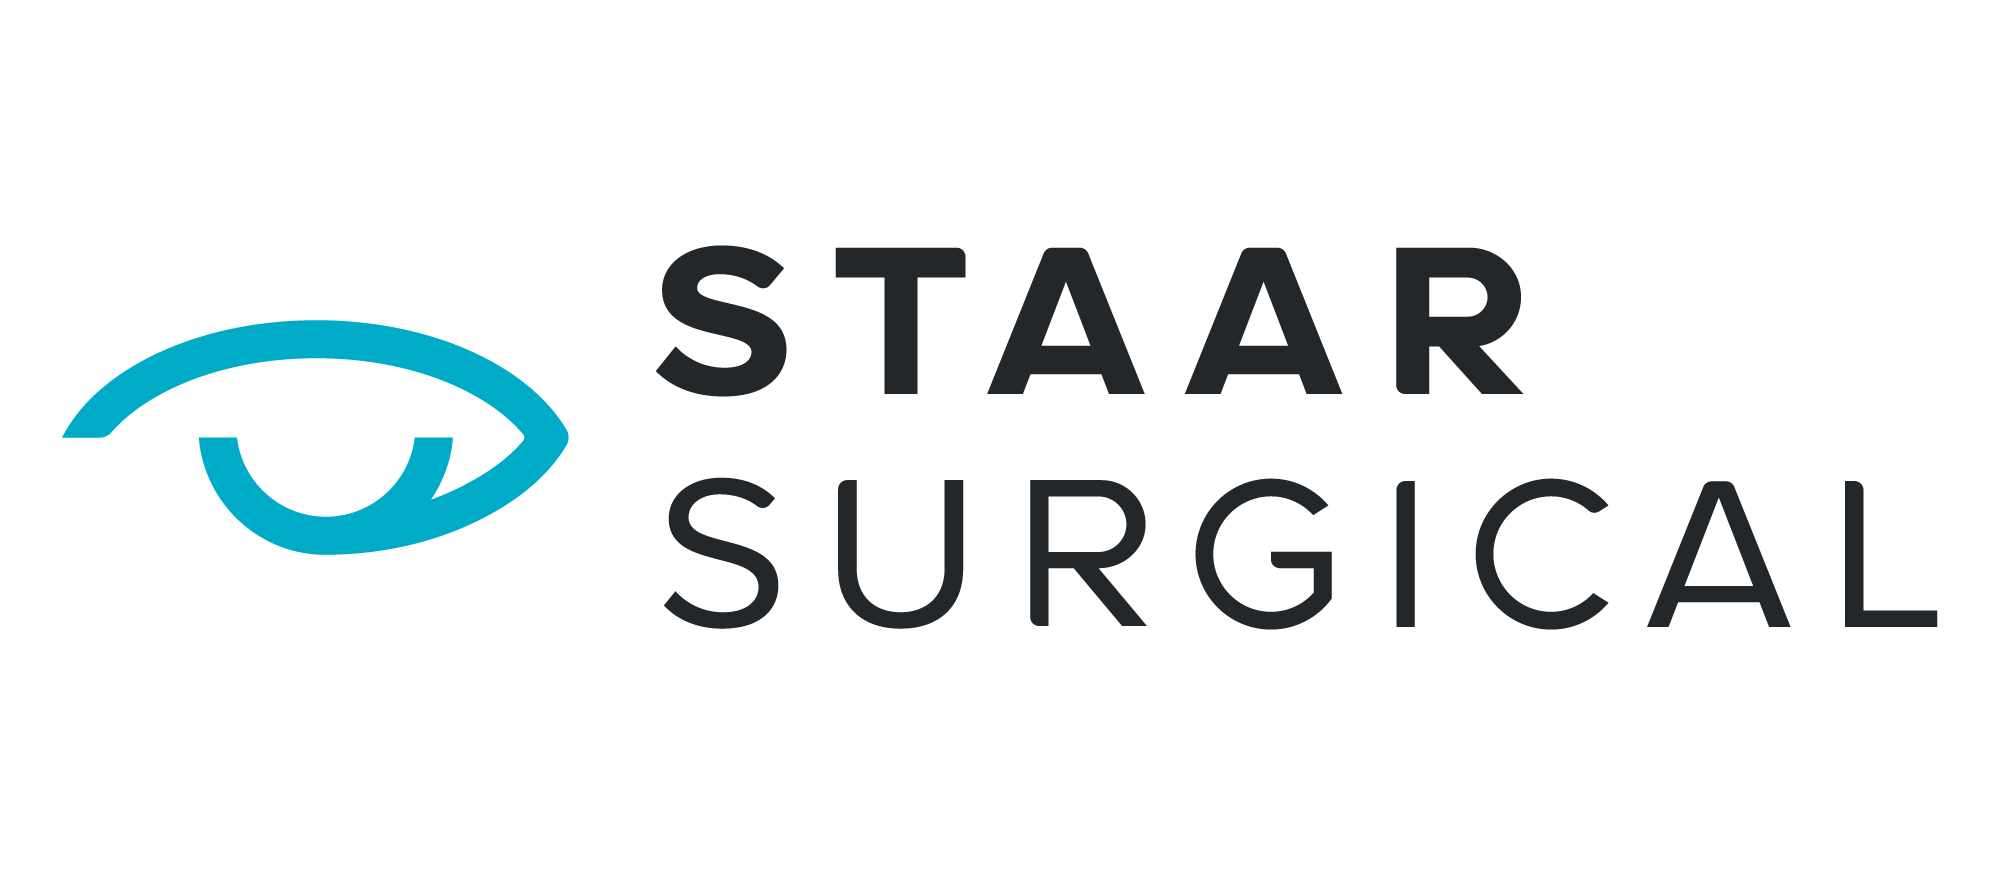 Starr Surgical